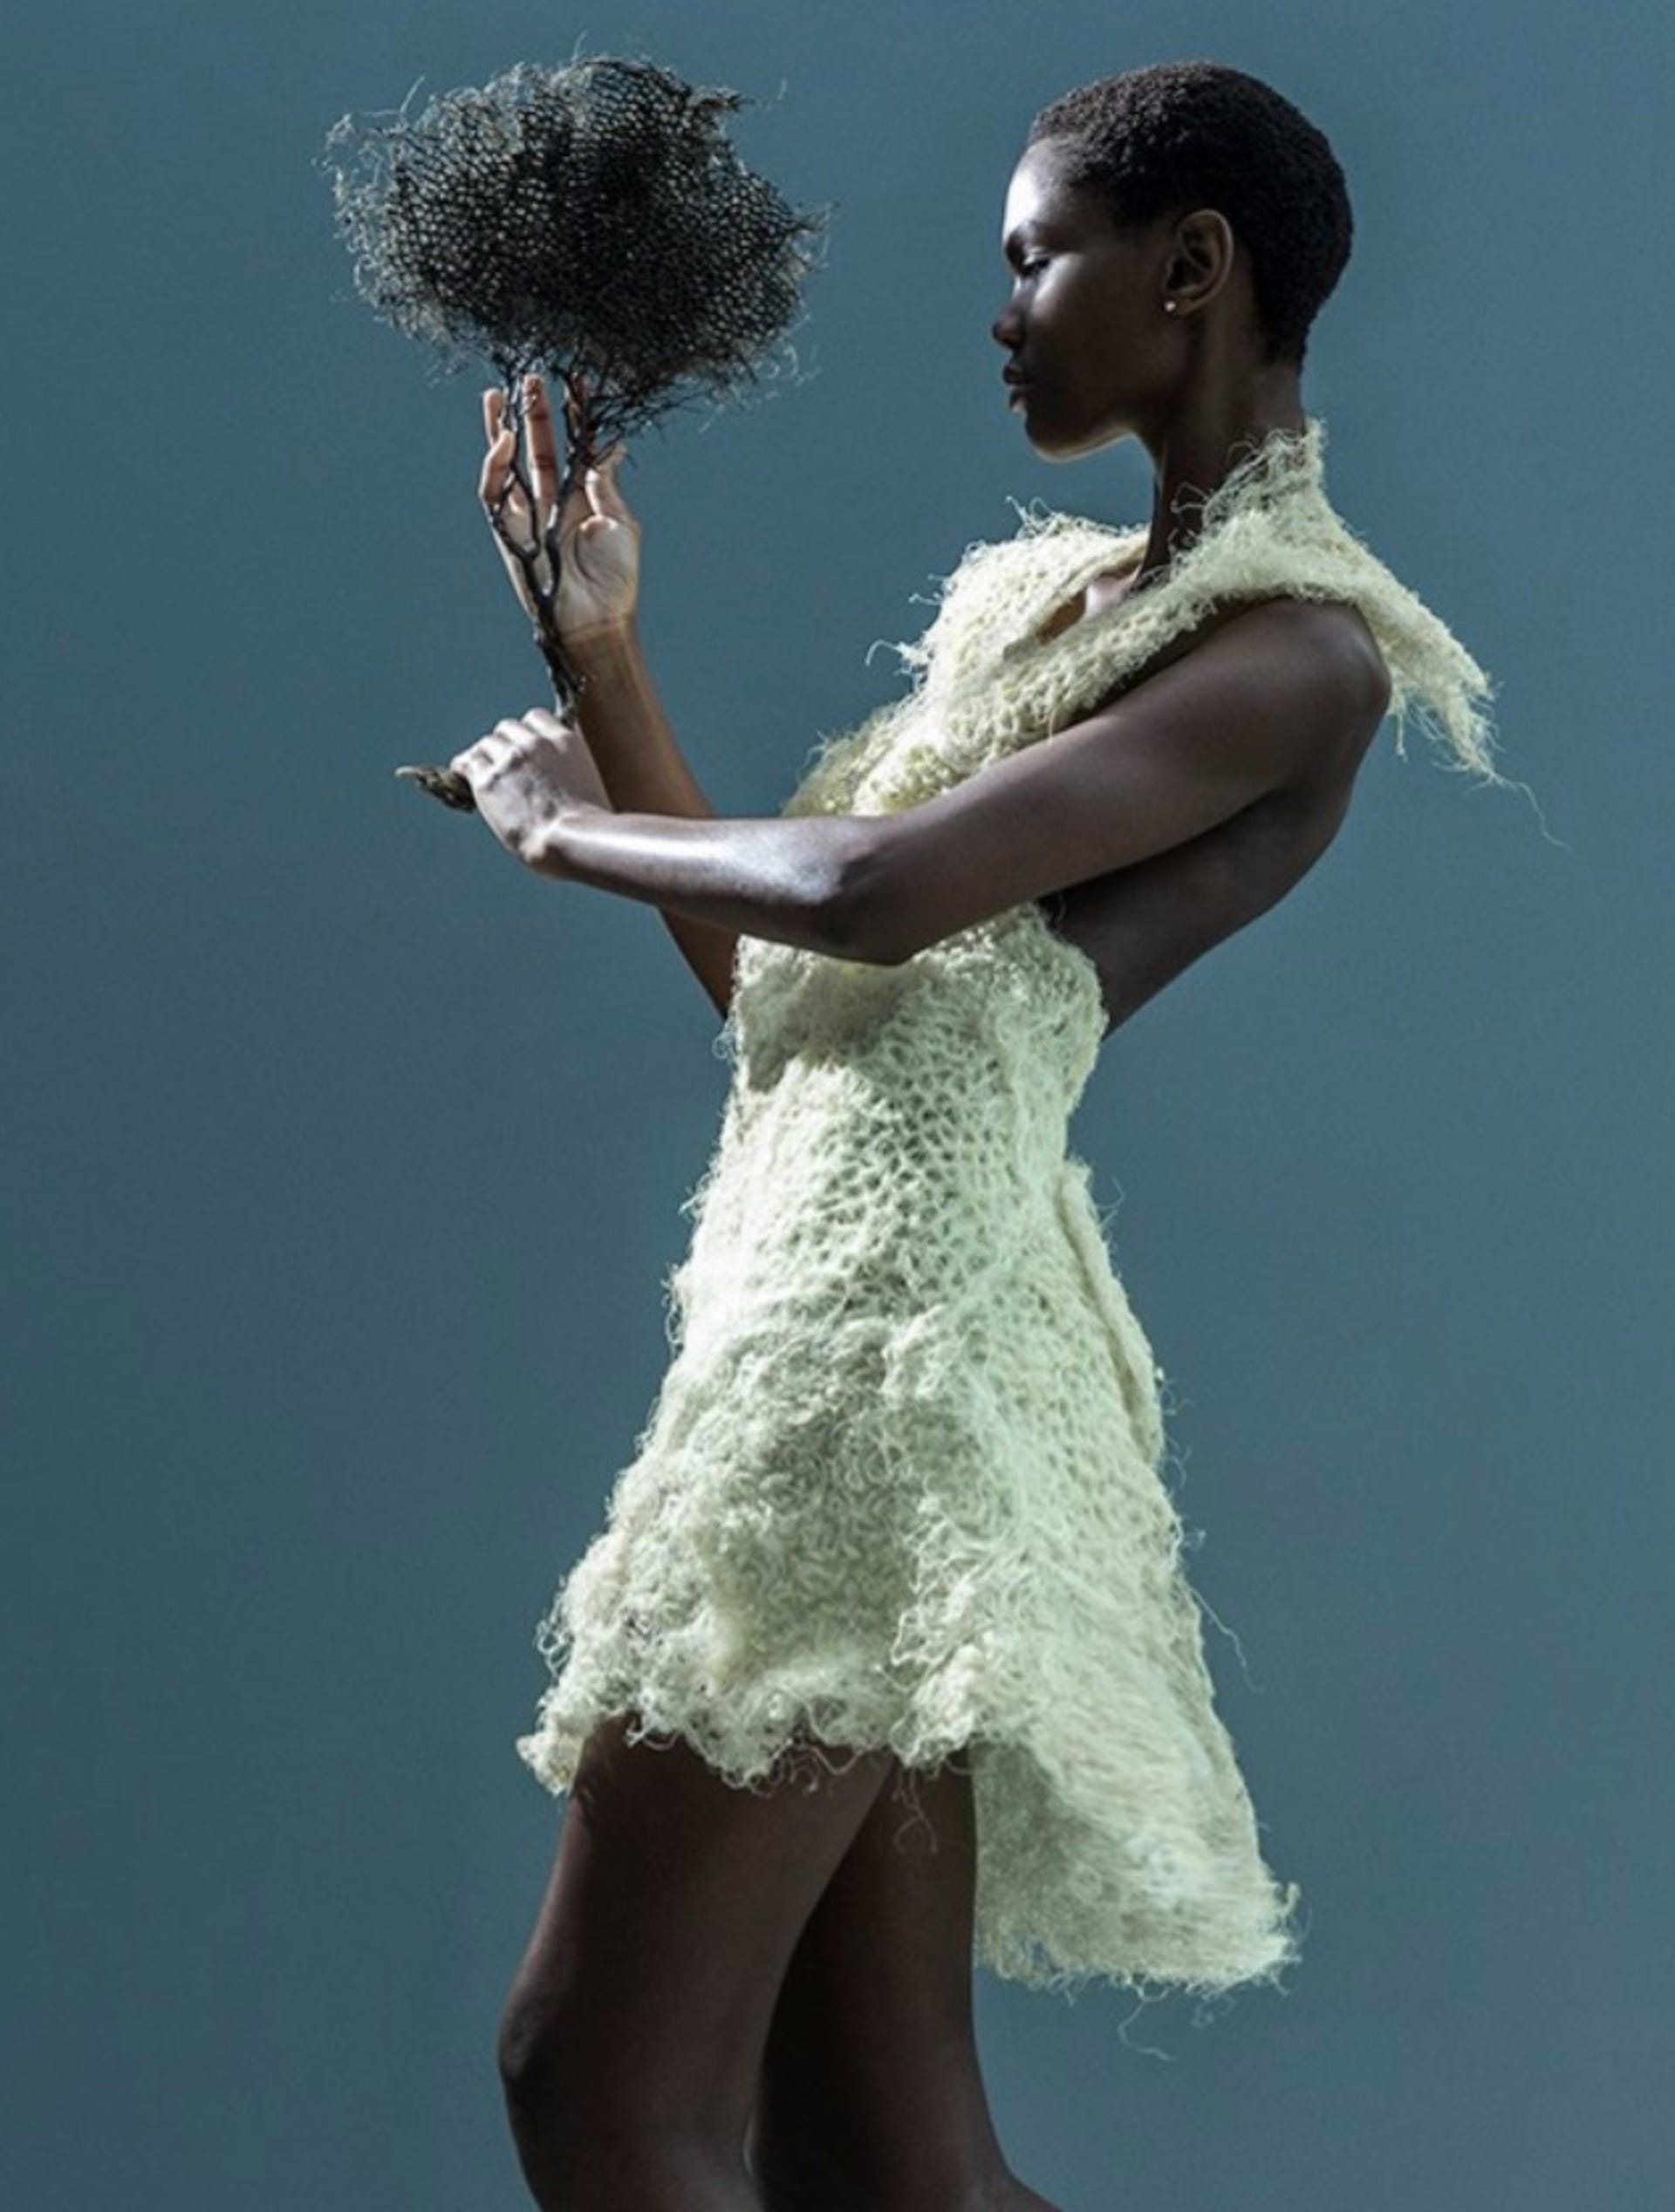 A model wears a short dress made from grass root and holds a ball of root dyed dark